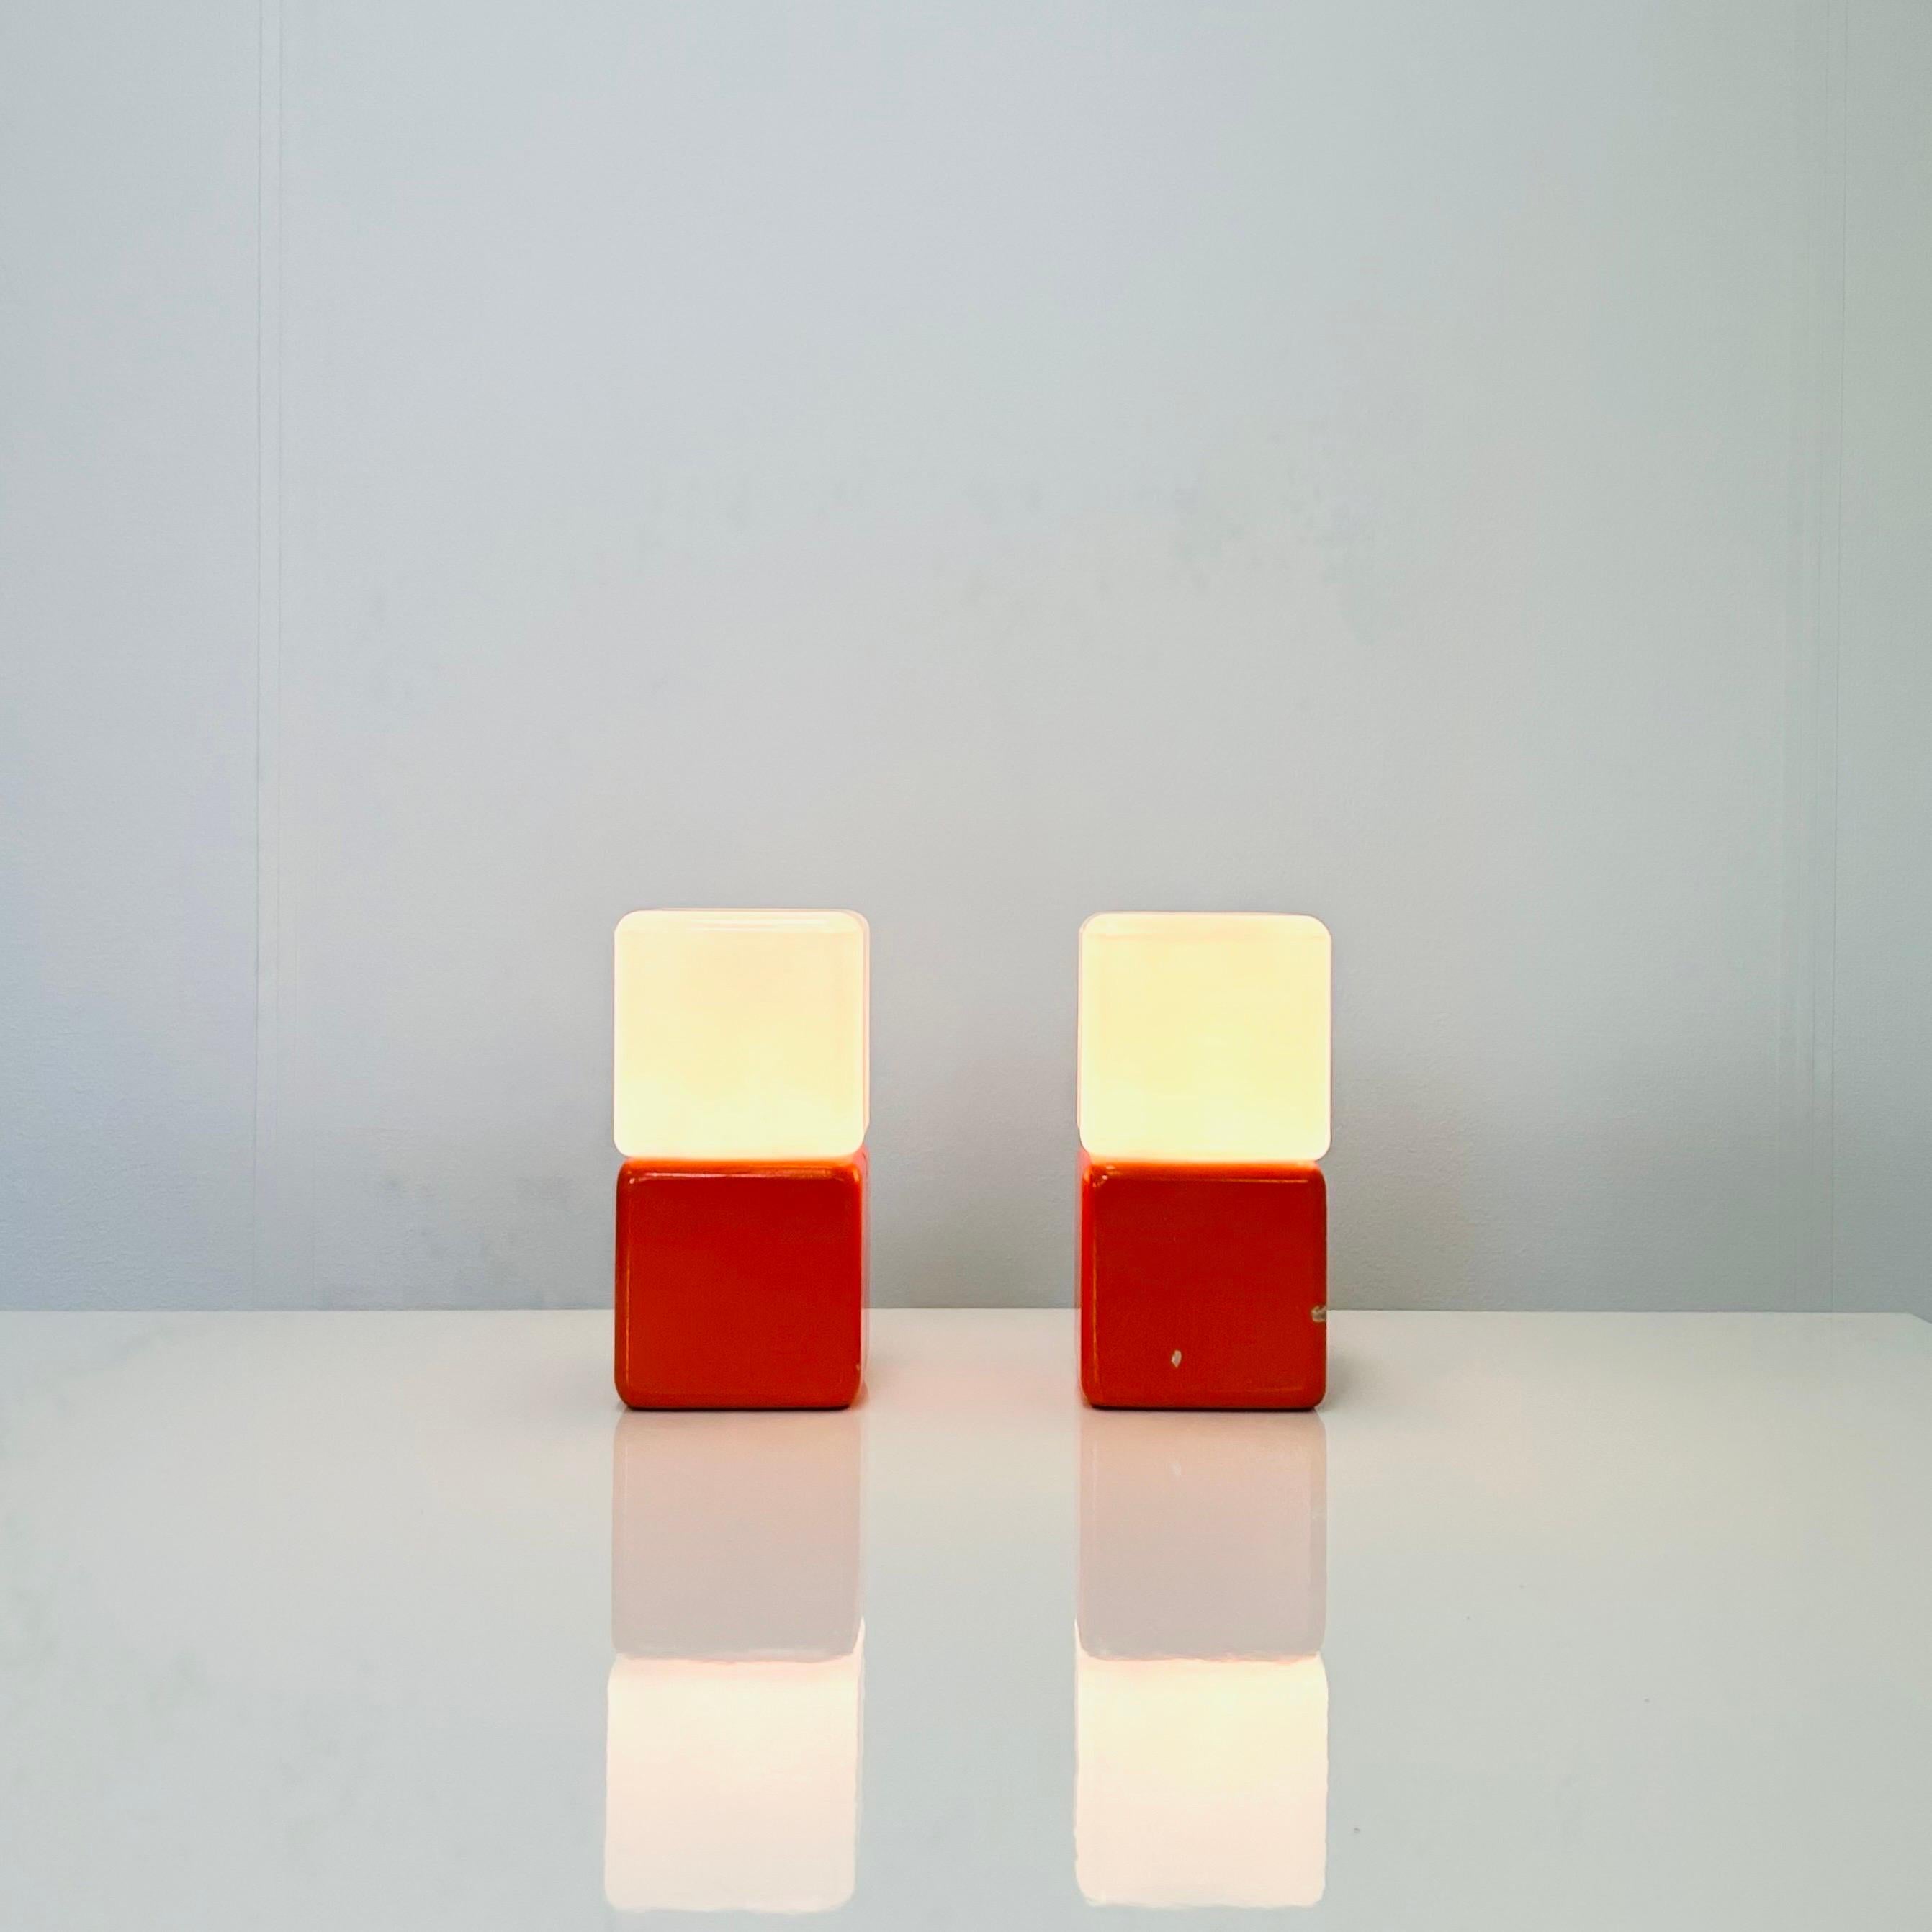 Mid-20th Century Pair of Orange & White Bed Lamps by Holm Sørensen, 1960s, Denmark For Sale